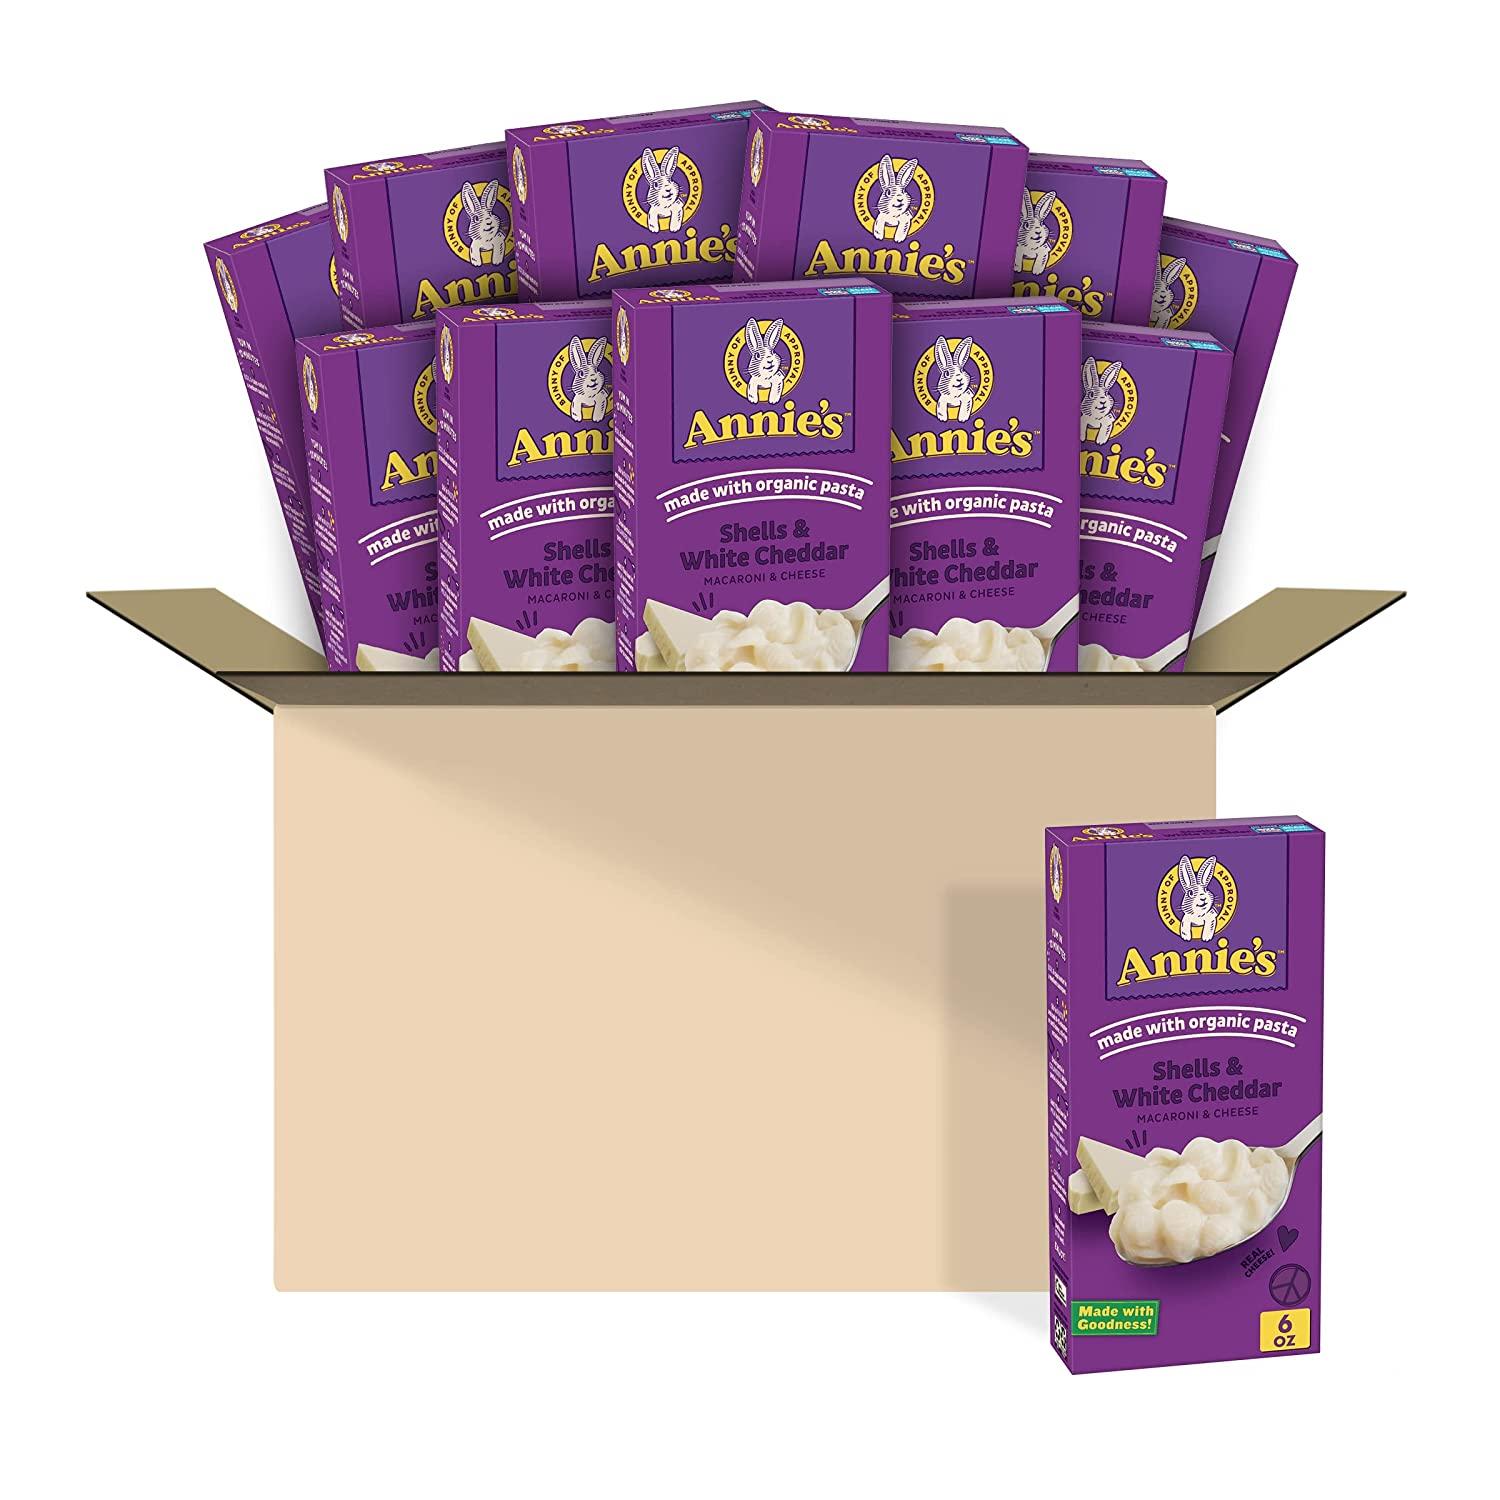 12 Shells and White Cheddar Macaroni and Cheese for $11.34 Shipped